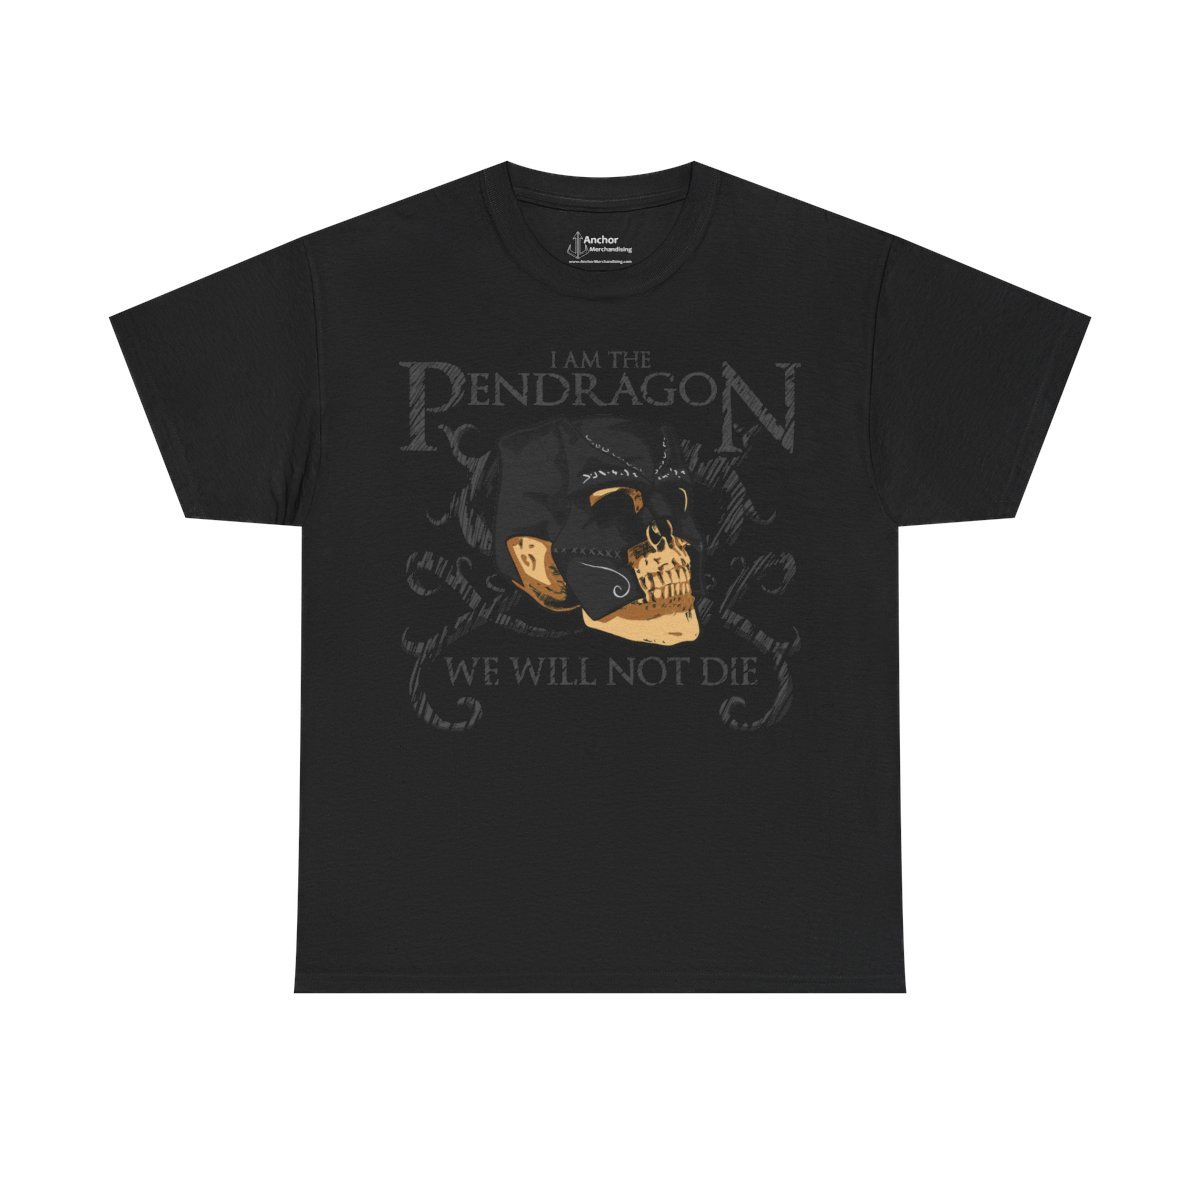 I Am The Pendragon – We Will Never Die Short Sleeve Tshirt